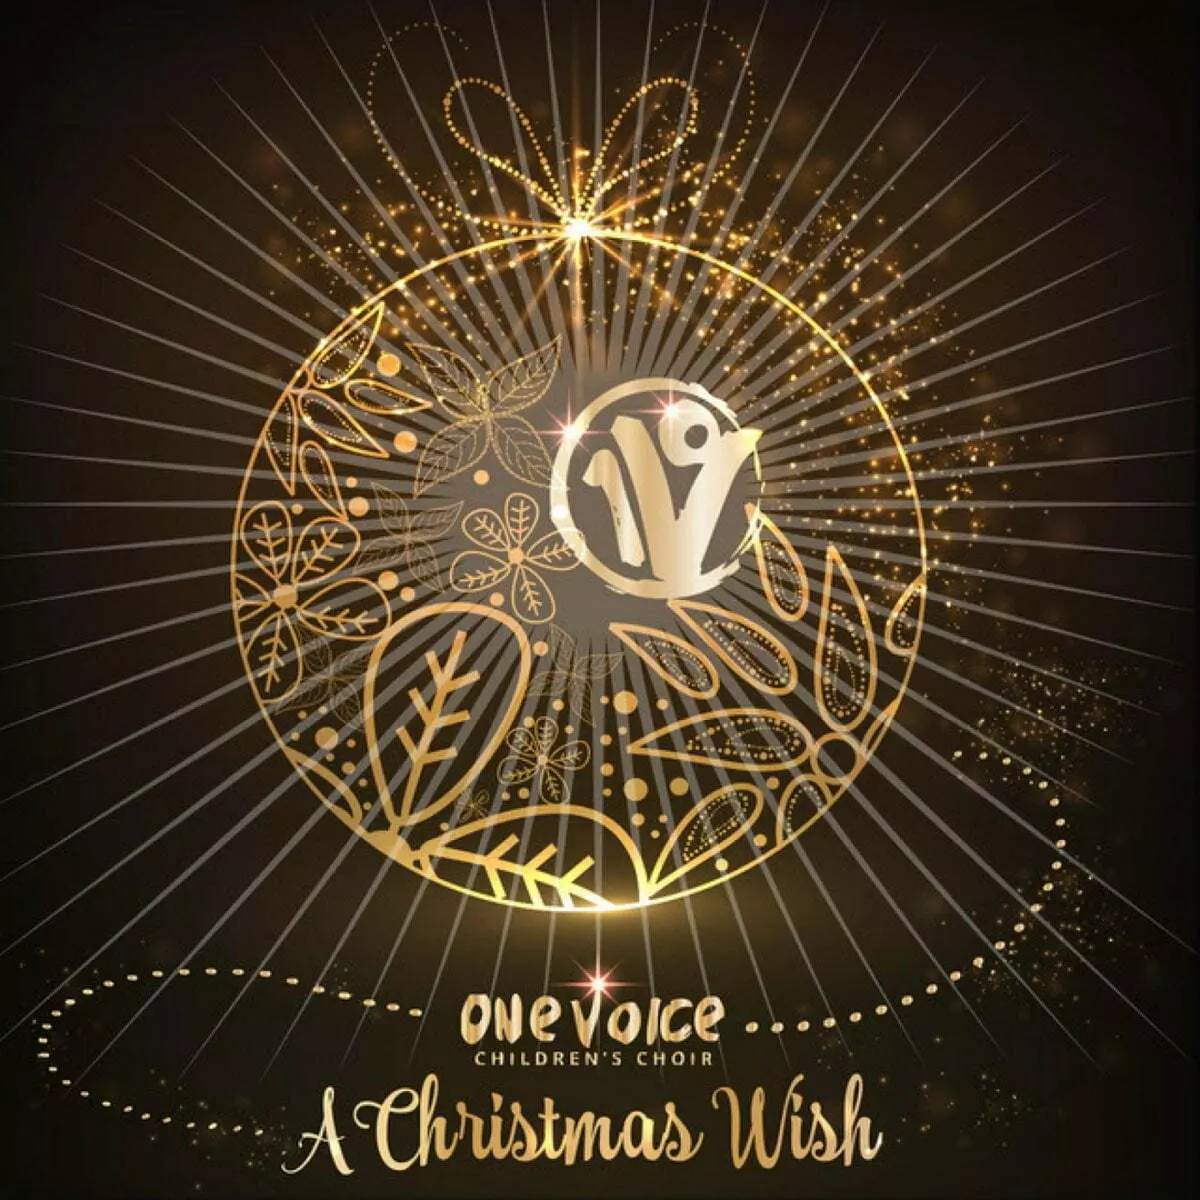 A Christmas Wish by One Voice Children's Choir on Apple Music